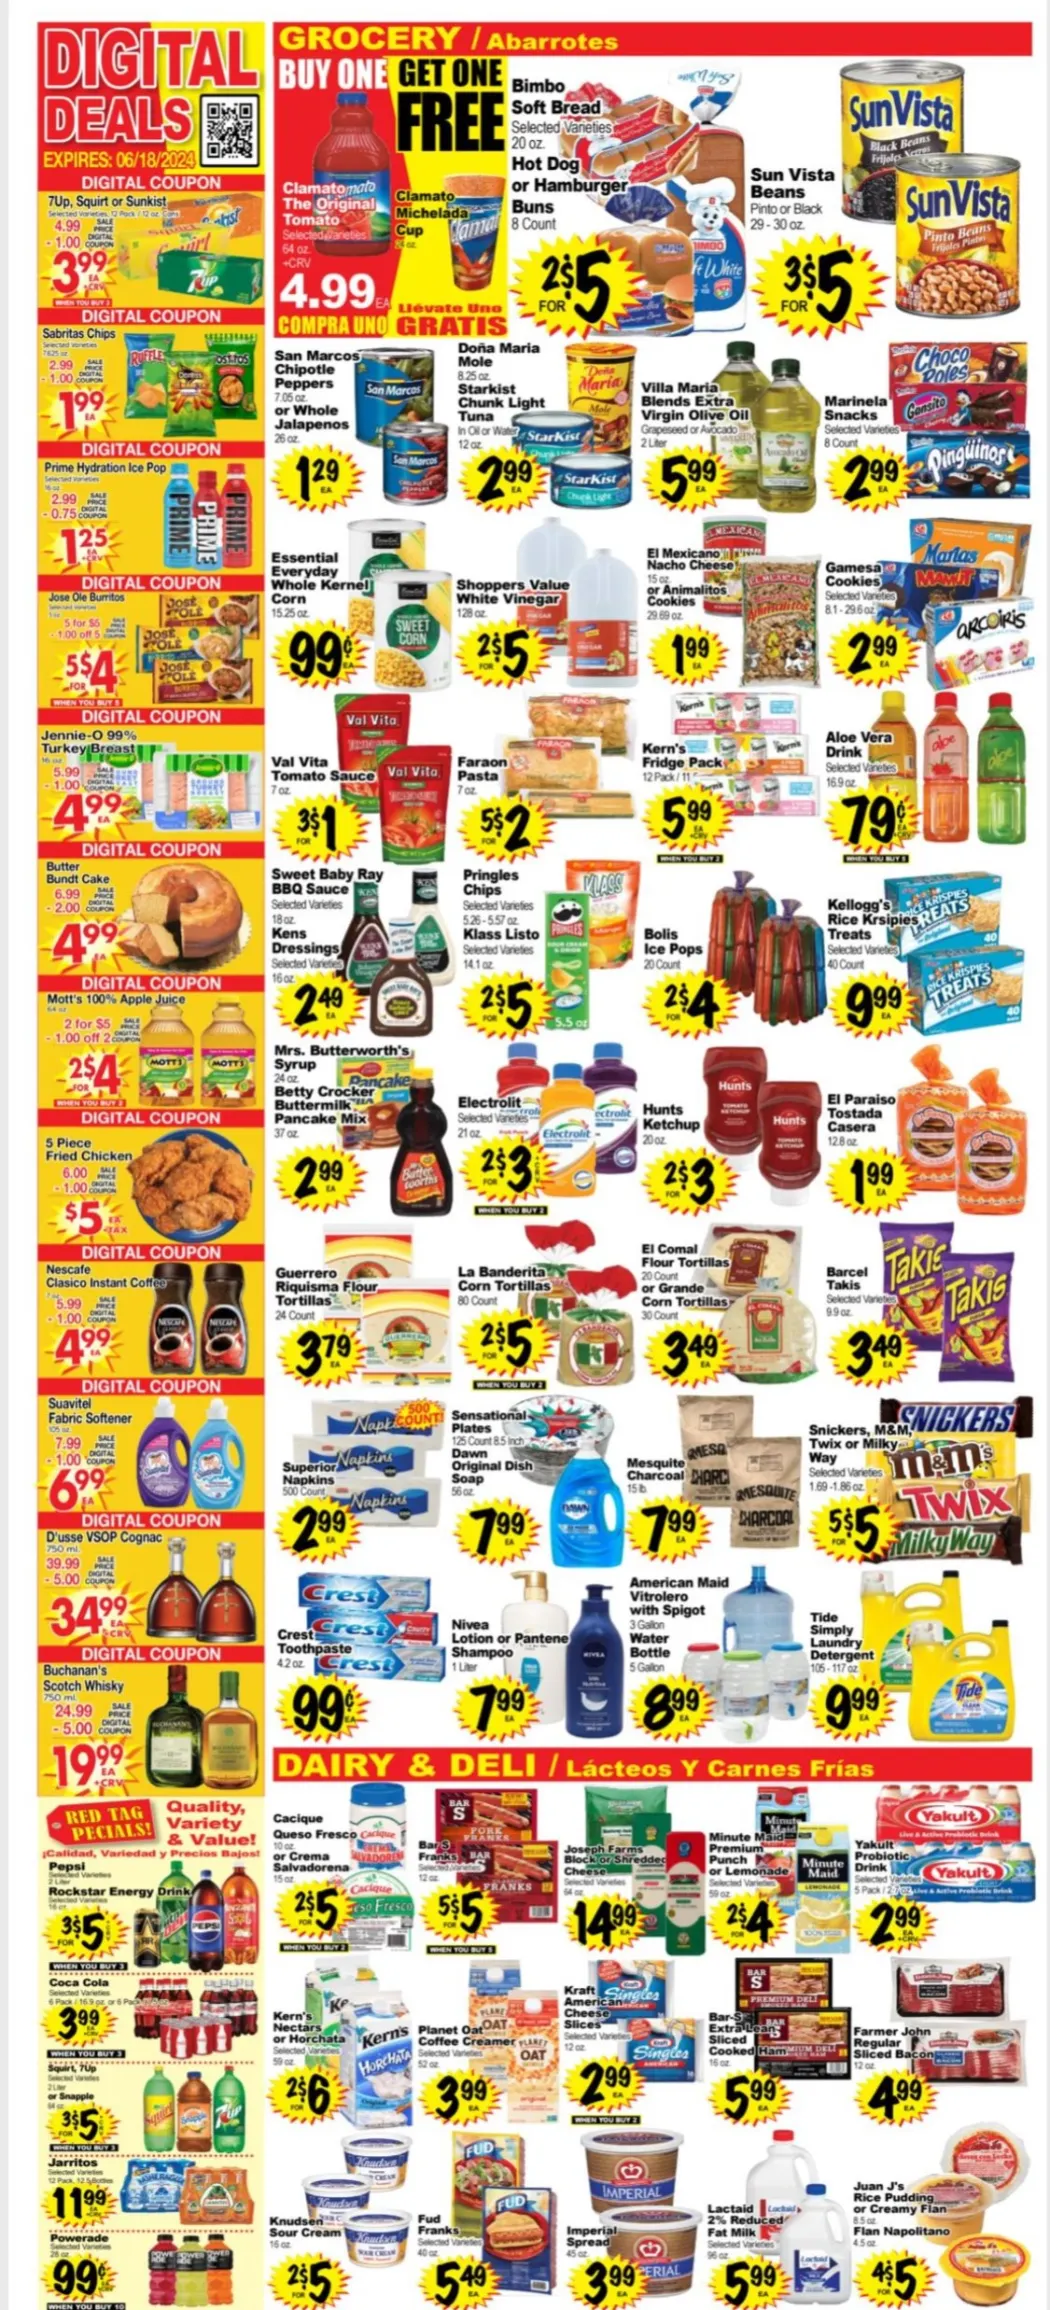 Superior Grocers Weekly Ad July 2024 Weekly Sales, Deals, Discounts and Digital Coupons.